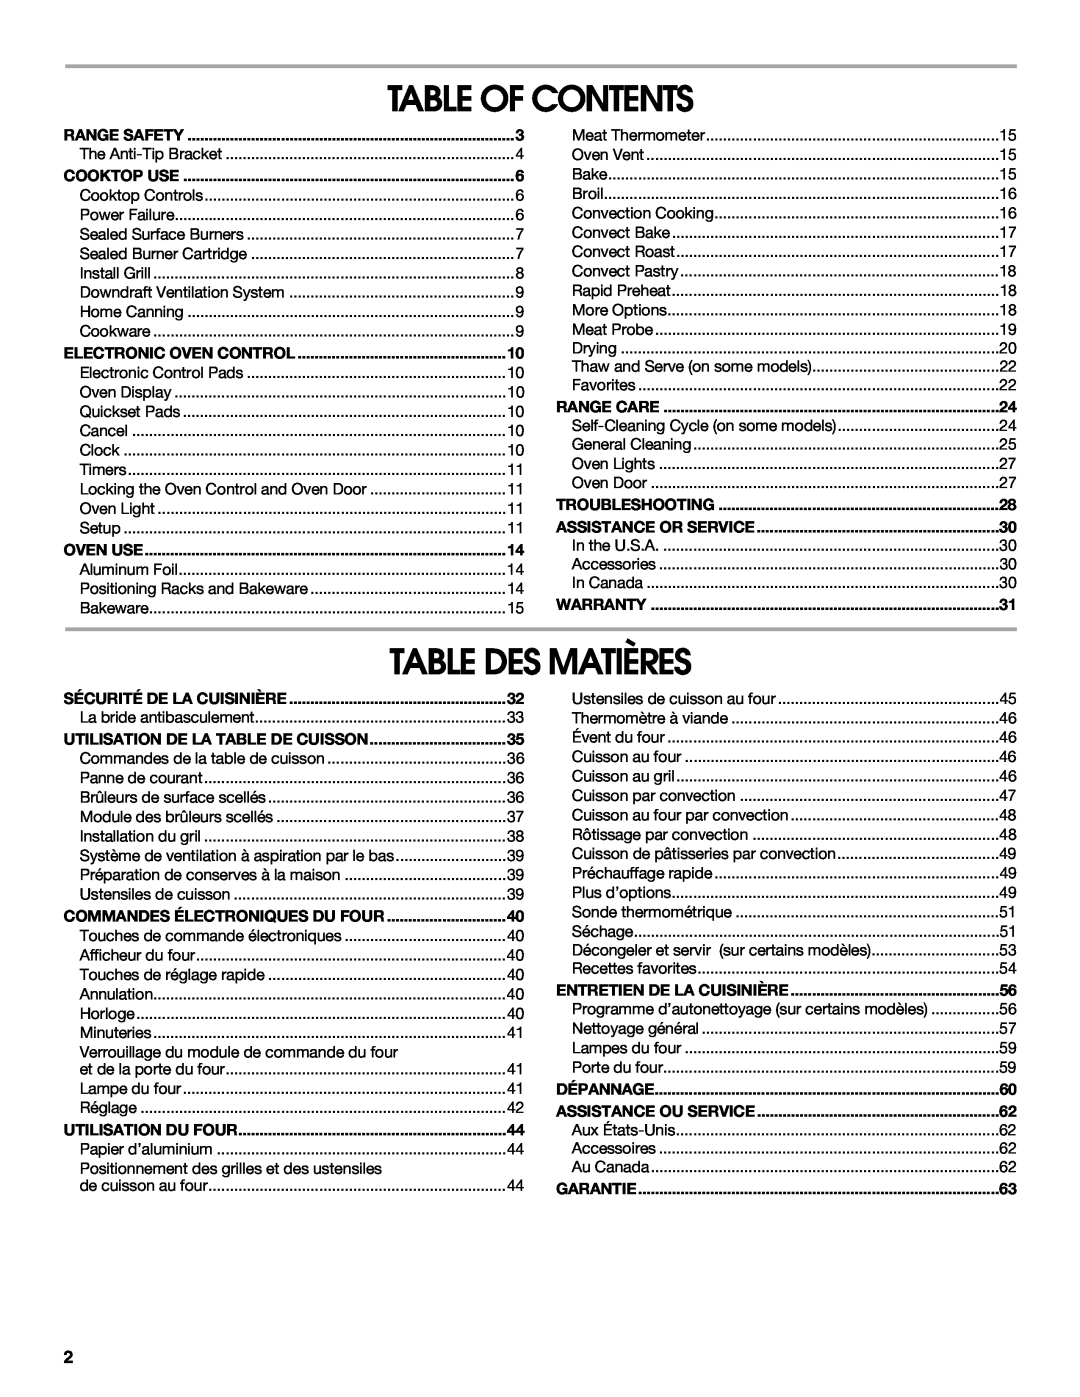 Jenn-Air JD59860 manual Table Of Contents, Table Des Matières, Range Safety, Cooktop Use, Electronic Oven Control, Oven Use 